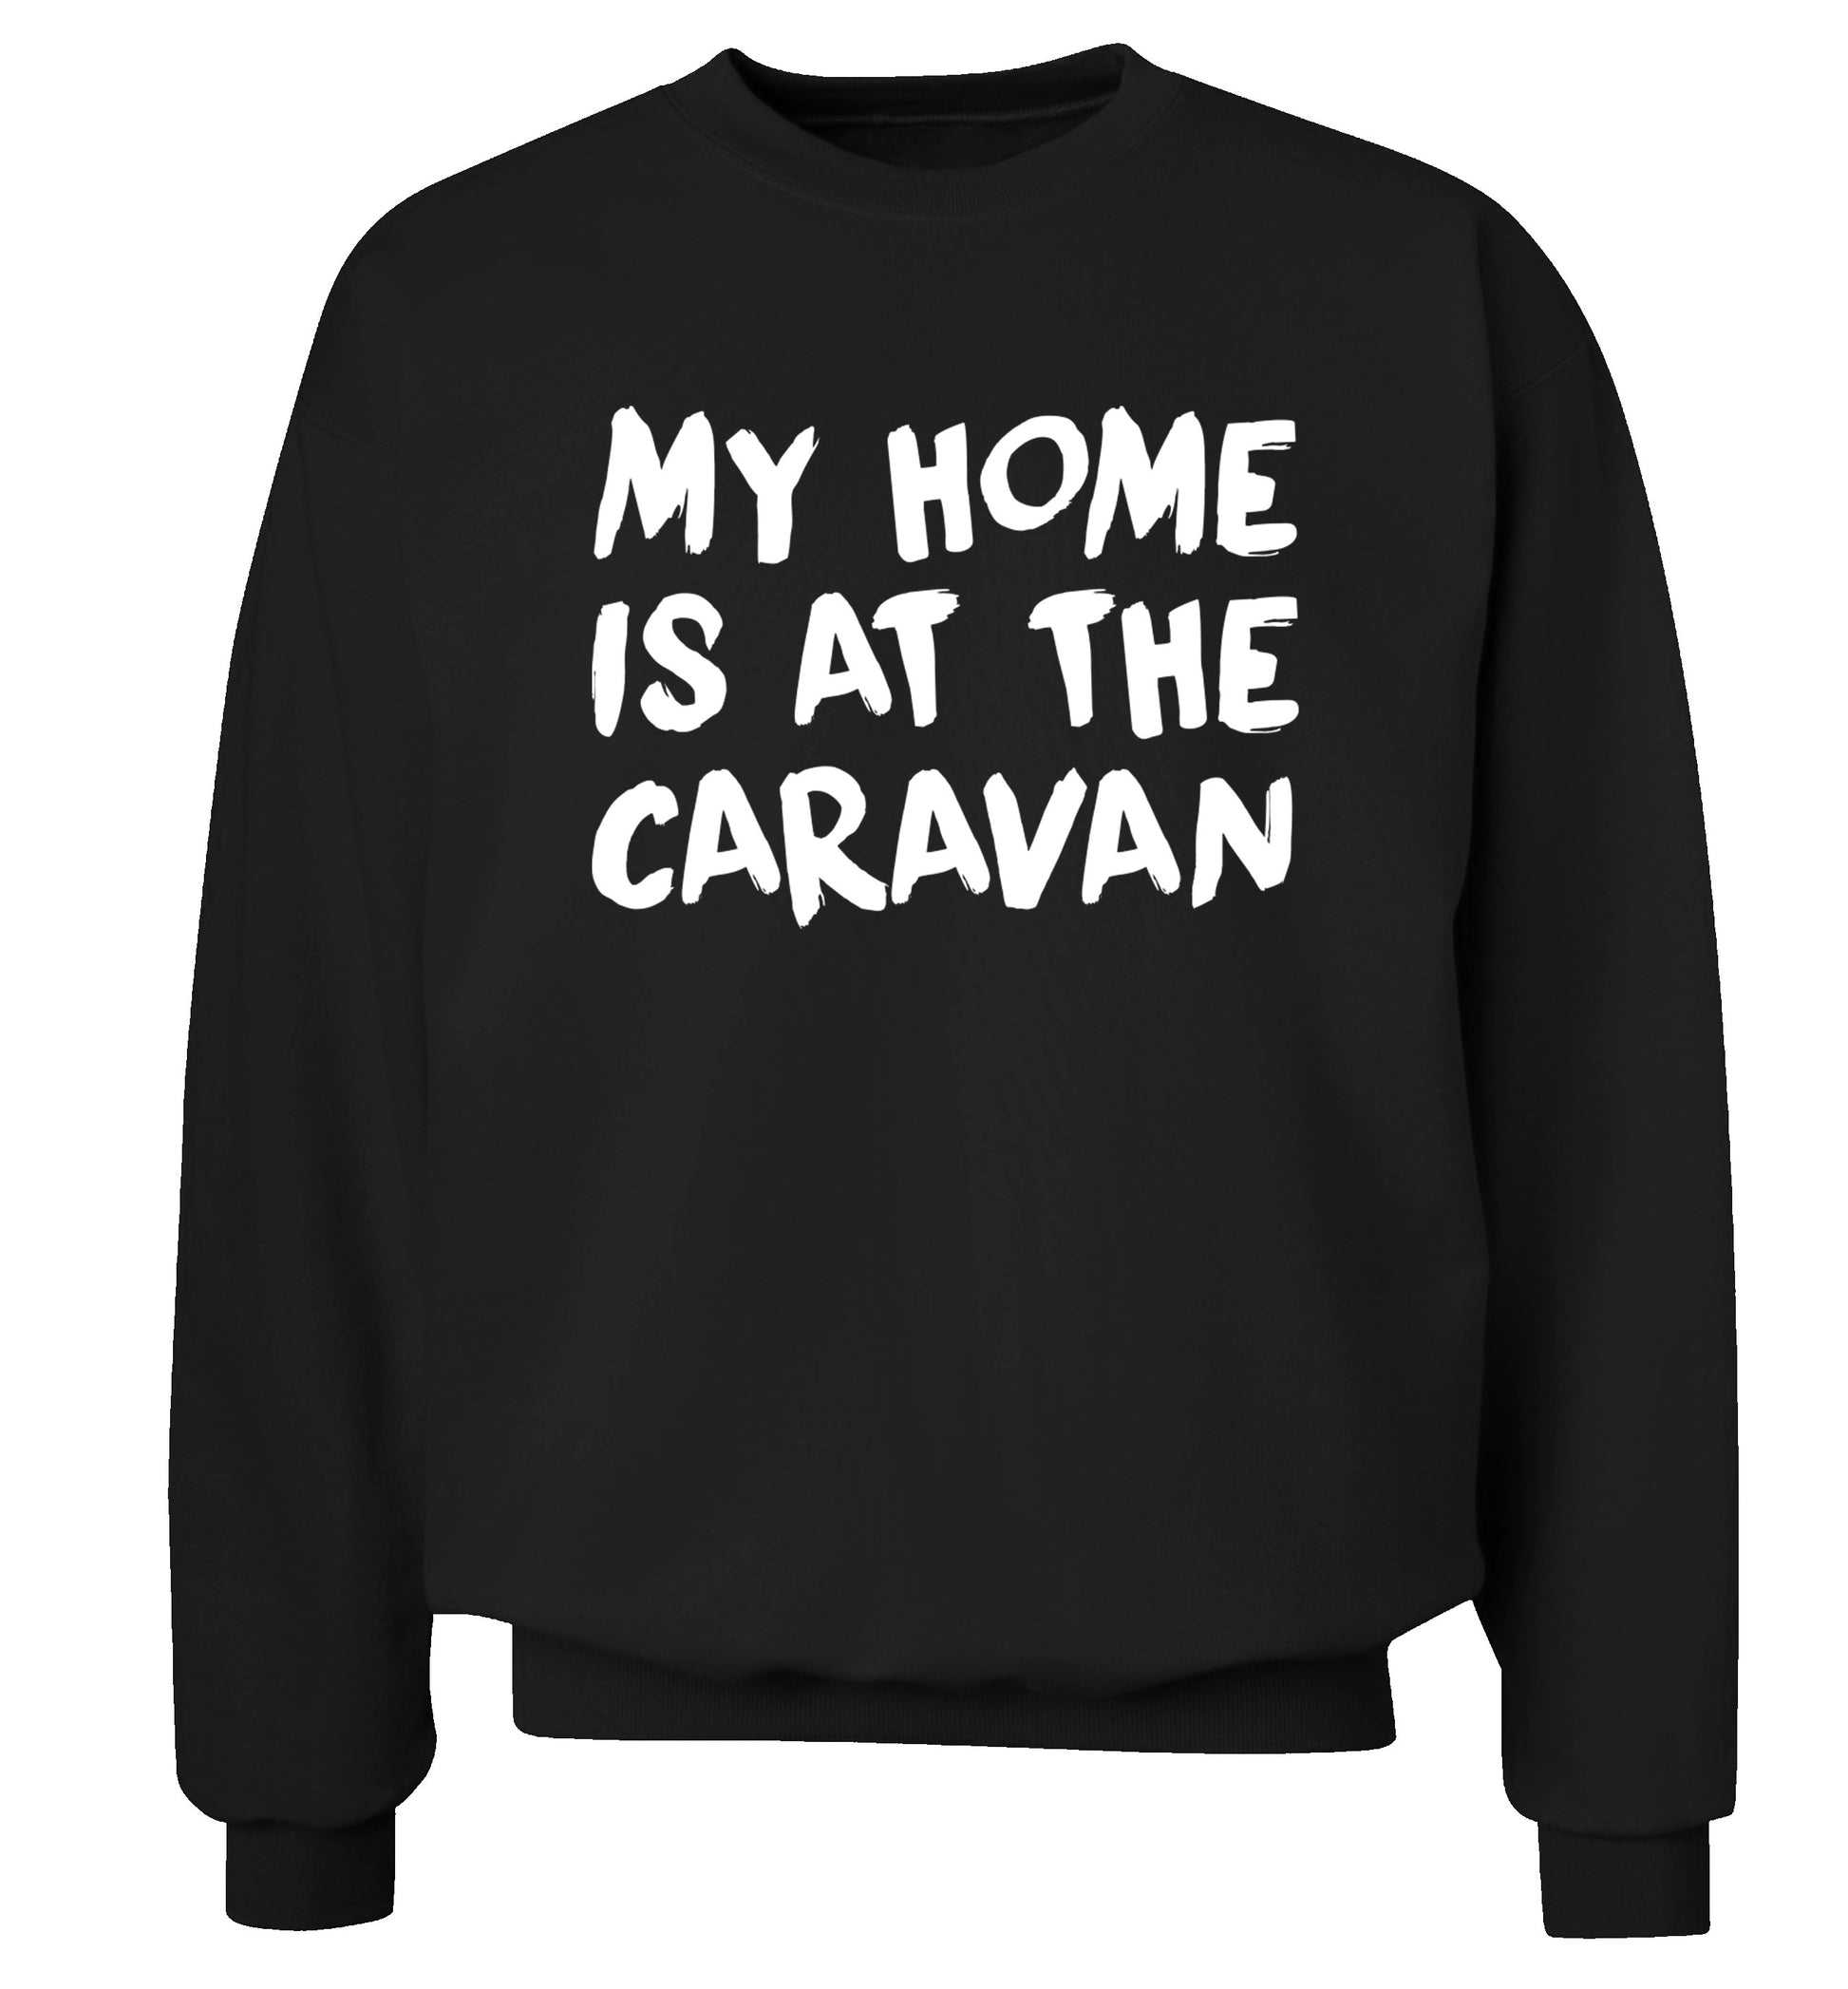 My home is at the caravan Adult's unisex black Sweater 2XL